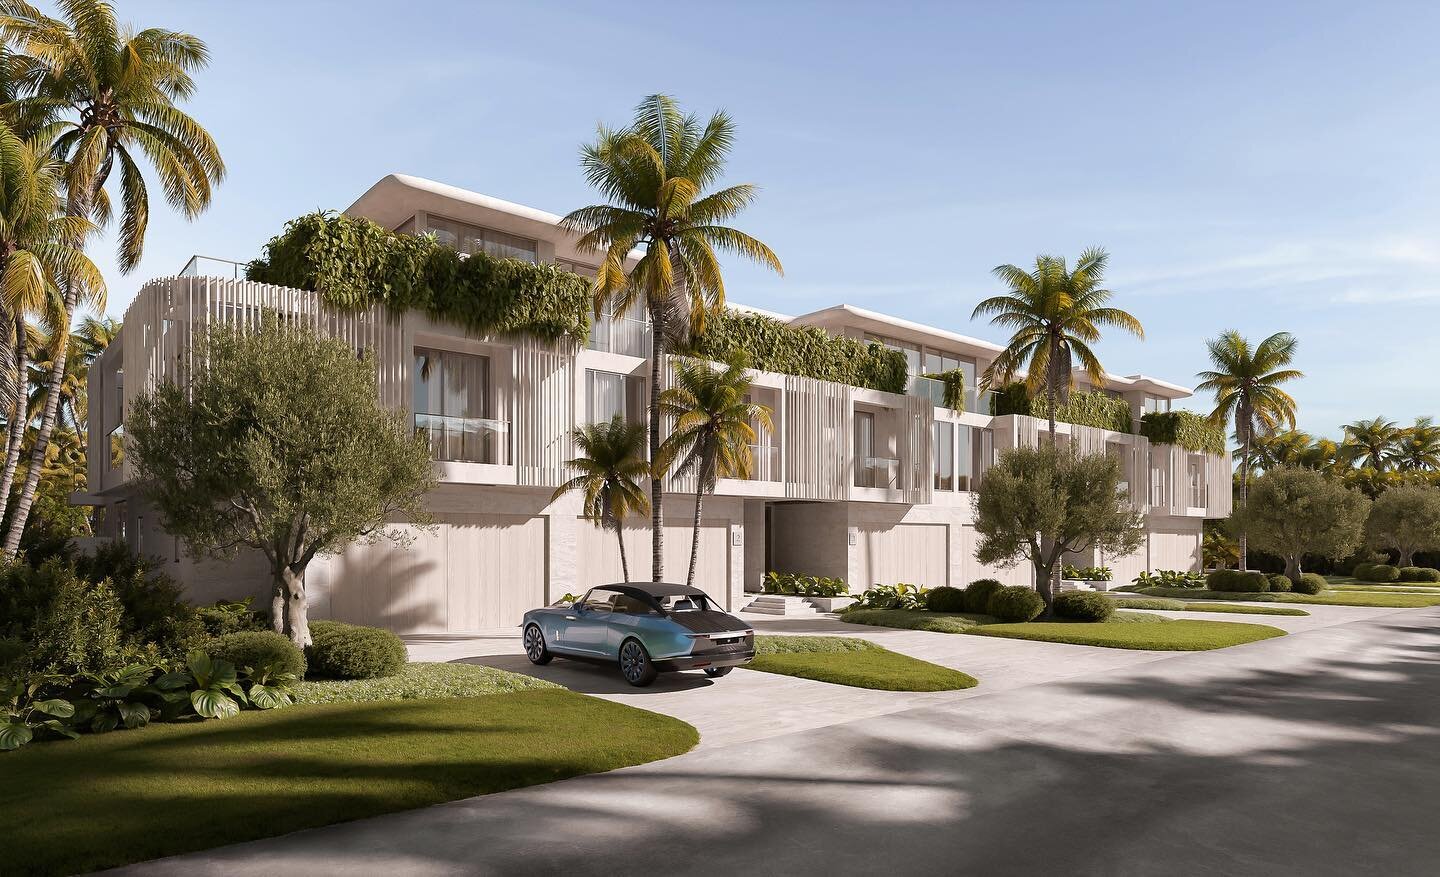 Architectural Design and Branding by @asthetiquegroup for Sirene Villas in Delray Beach, Florida.

1 of 8 active developments out of our Miami office. 🌴 Stay tuned, a new wave of Asthetique is coming.

Development by @stammdevelopmentgroup